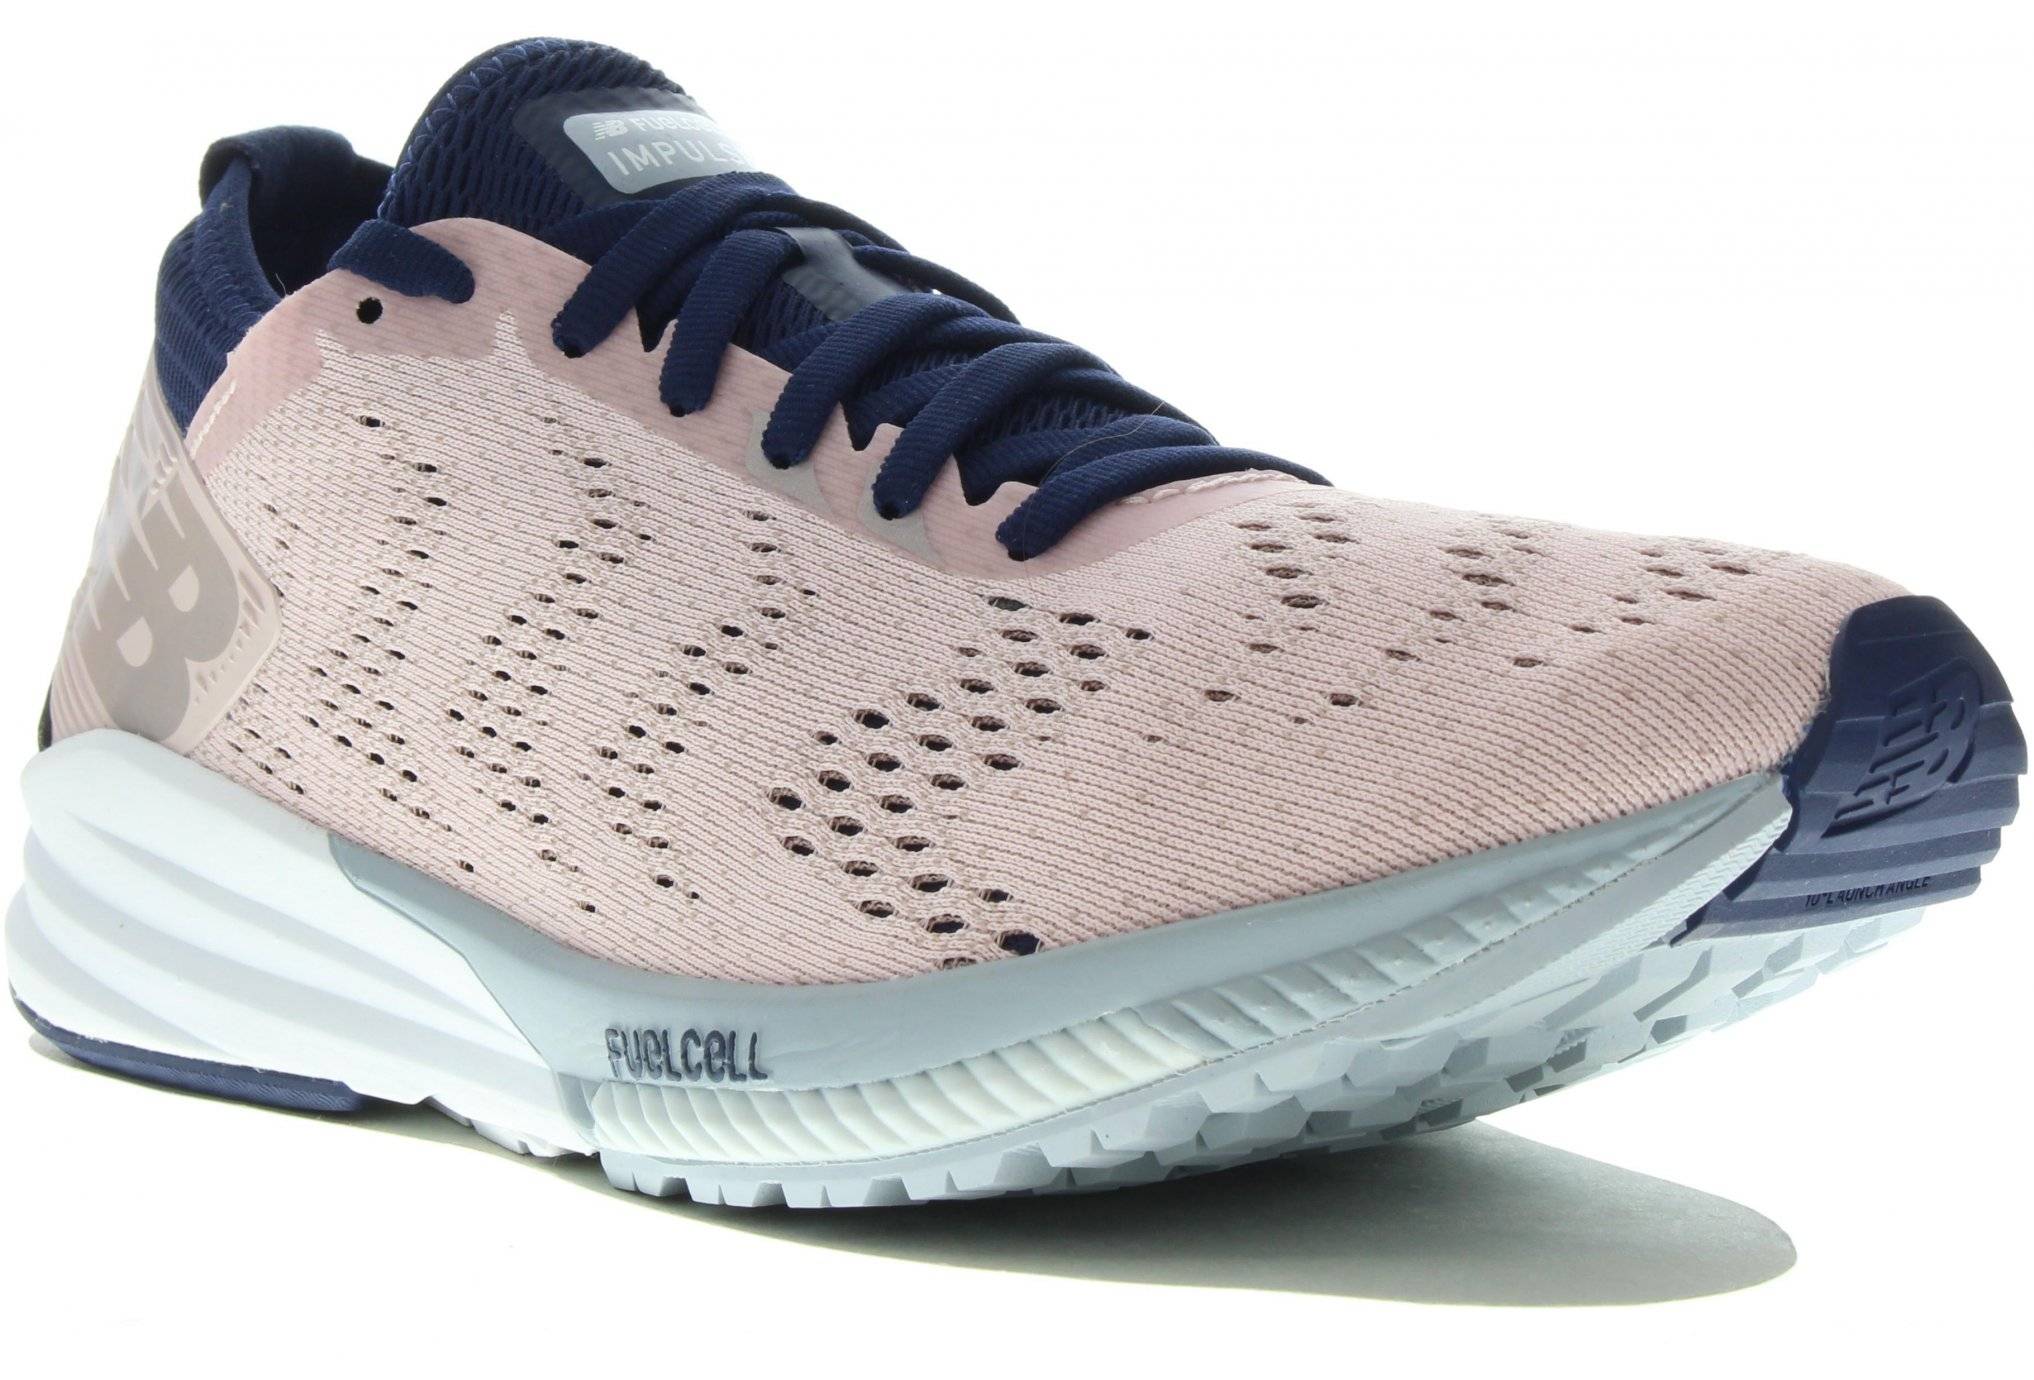 New Balance FuelCell Impulse W 